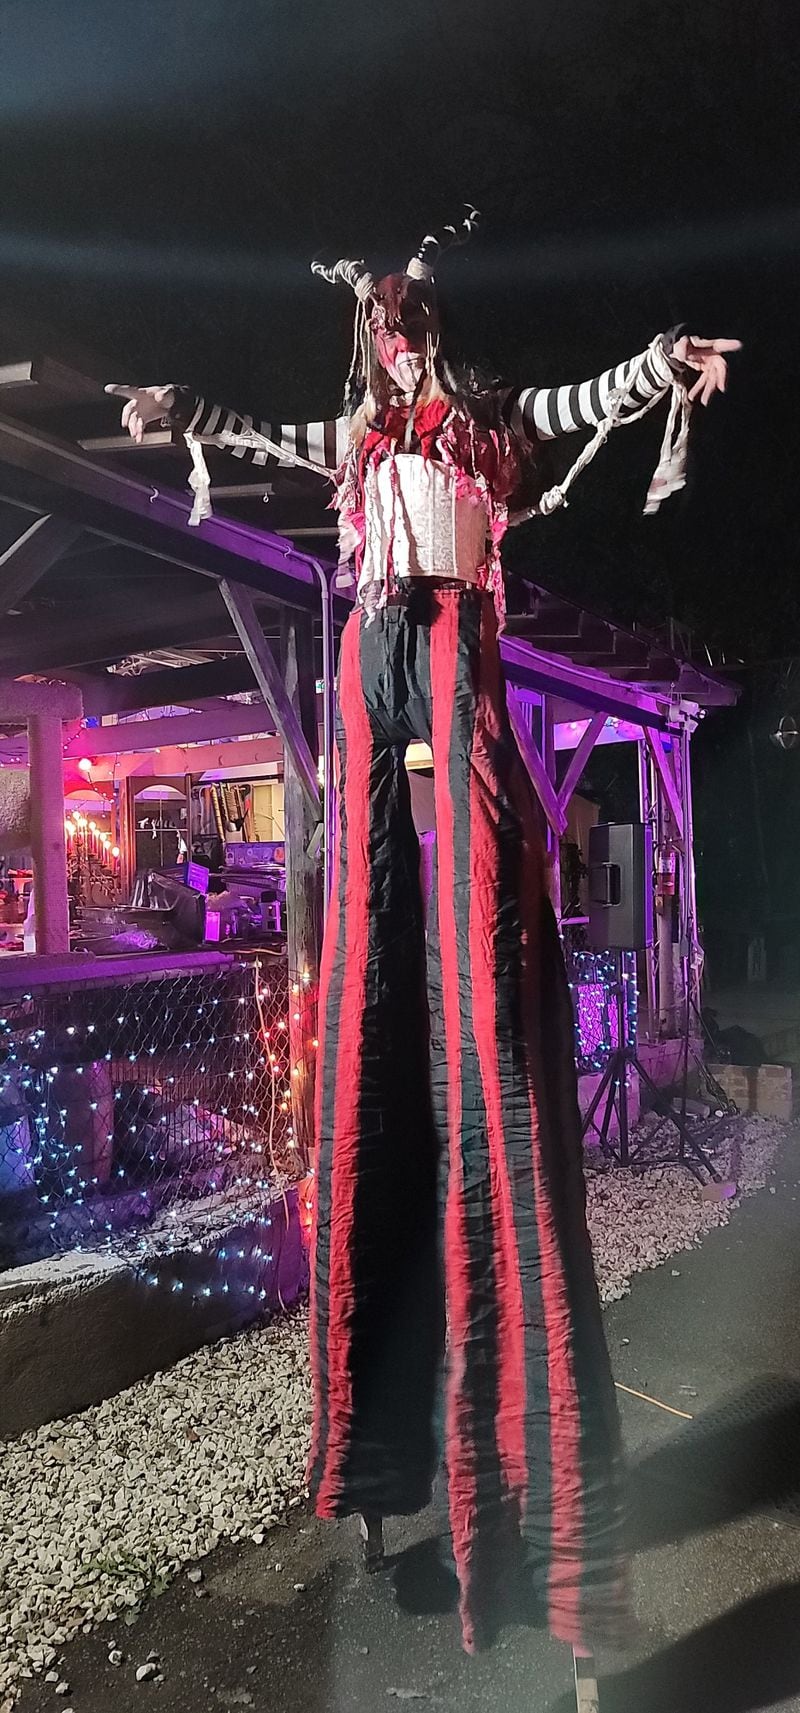 Dawn Erich and Nicholas Payne staged a Goth Victorian wedding at the Heck House, complete with stilt-walkers and fire dancers. They both enjoyed the ambience. Photo: Danny Hunter